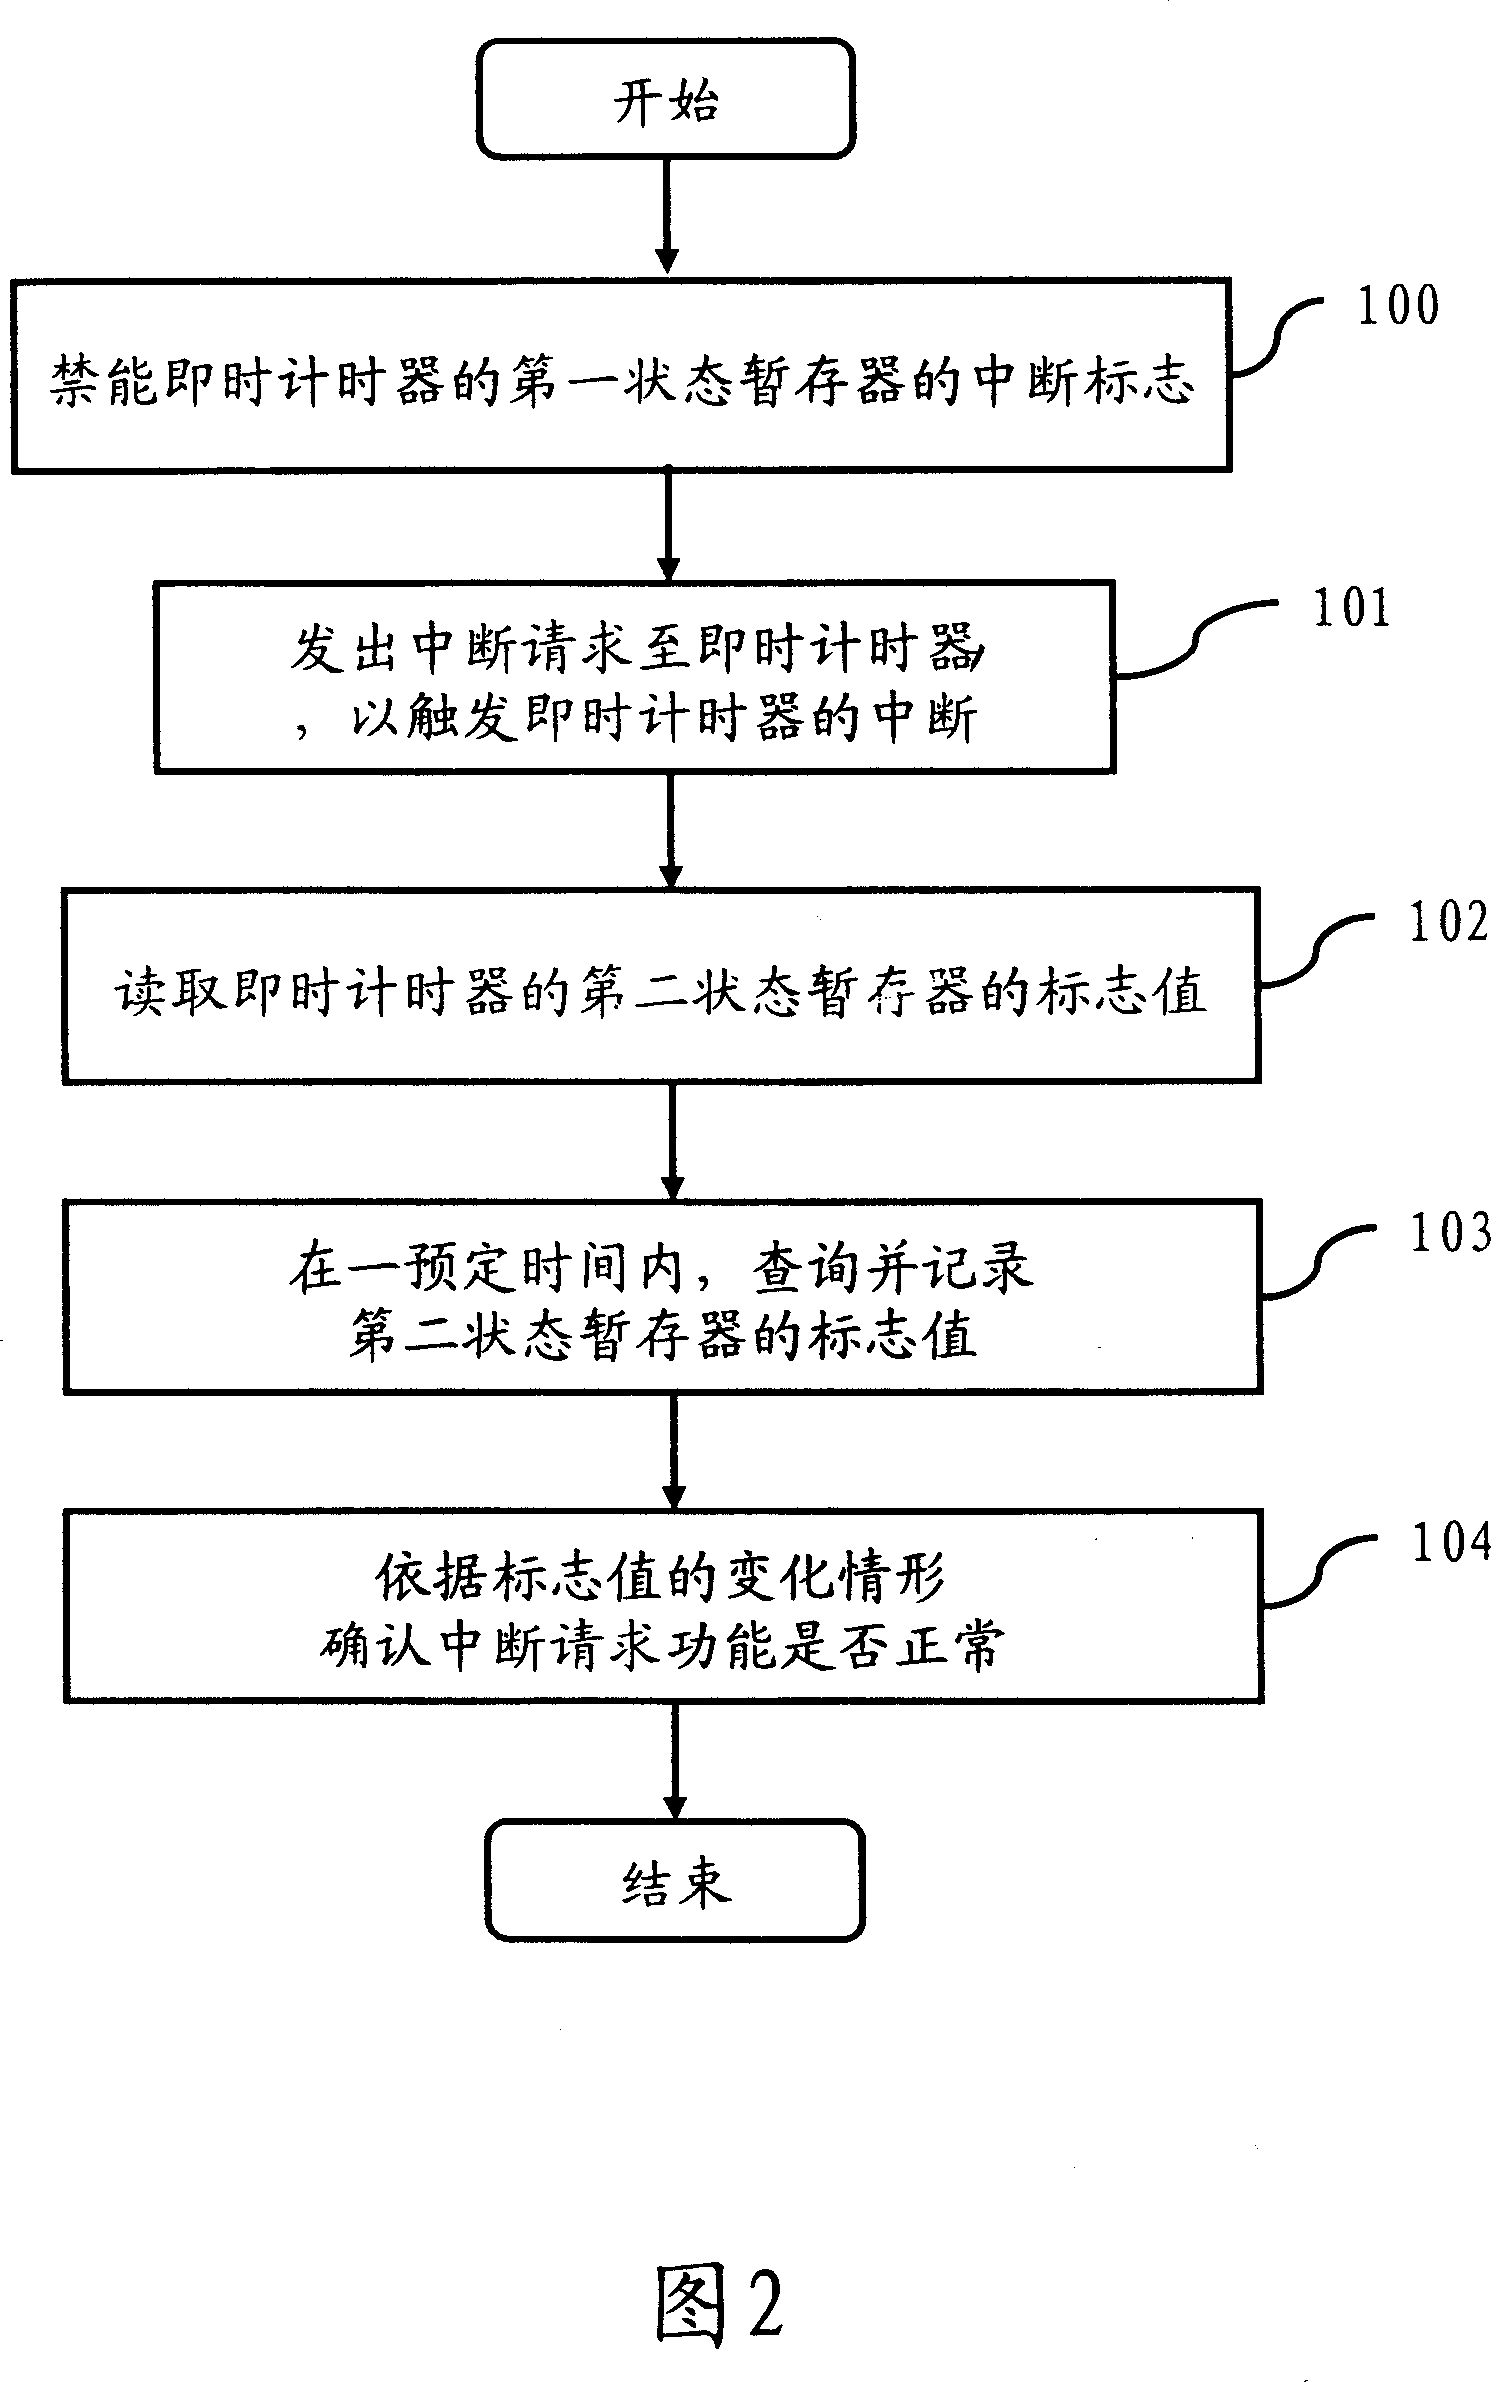 Method for interrupting request inspection of realtime timing service under Linux or Windows operation system